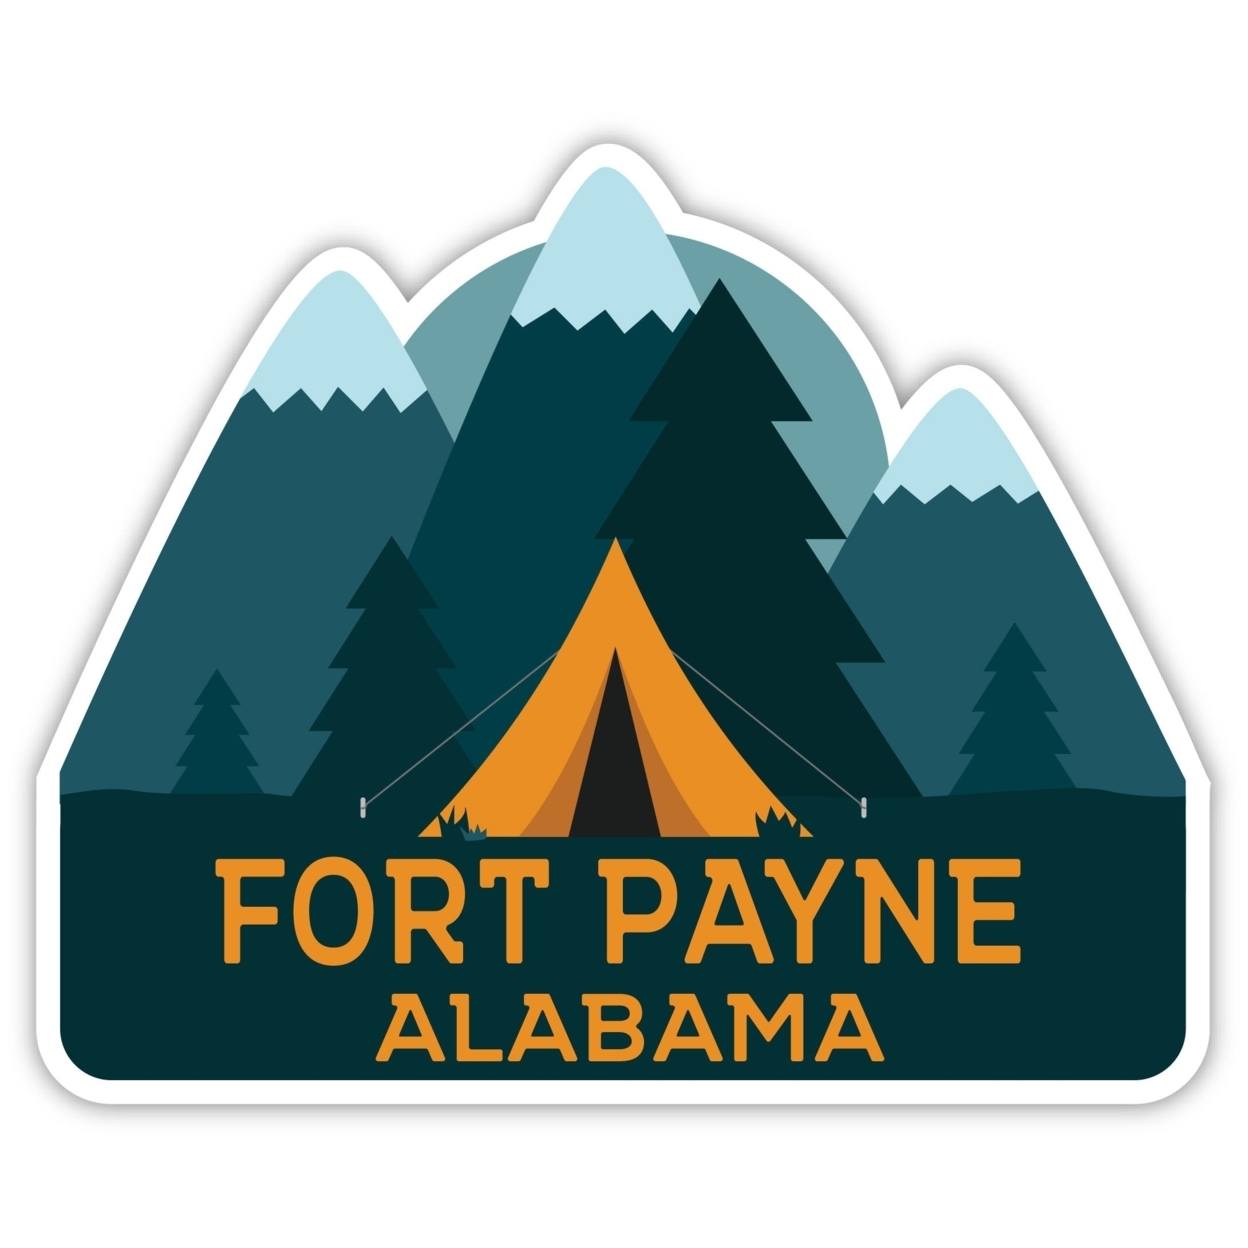 Fort Payne Alabama Souvenir Decorative Stickers (Choose Theme And Size) - 4-Pack, 10-Inch, Camp Life